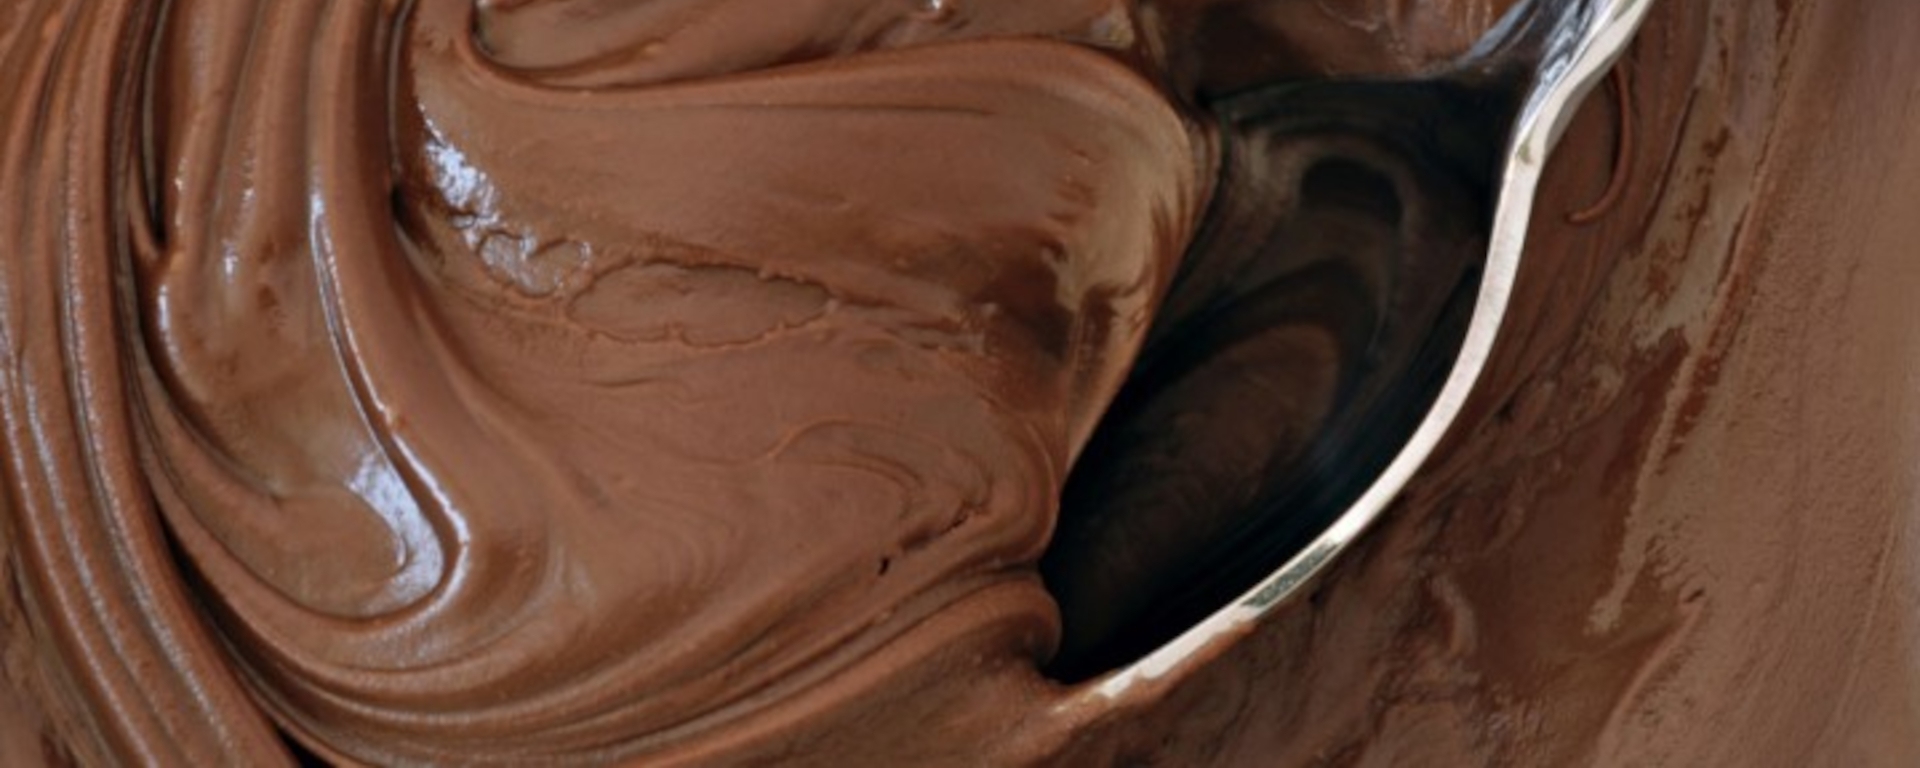 LuvMyRecipe.com - Chocolate Frosting Featured